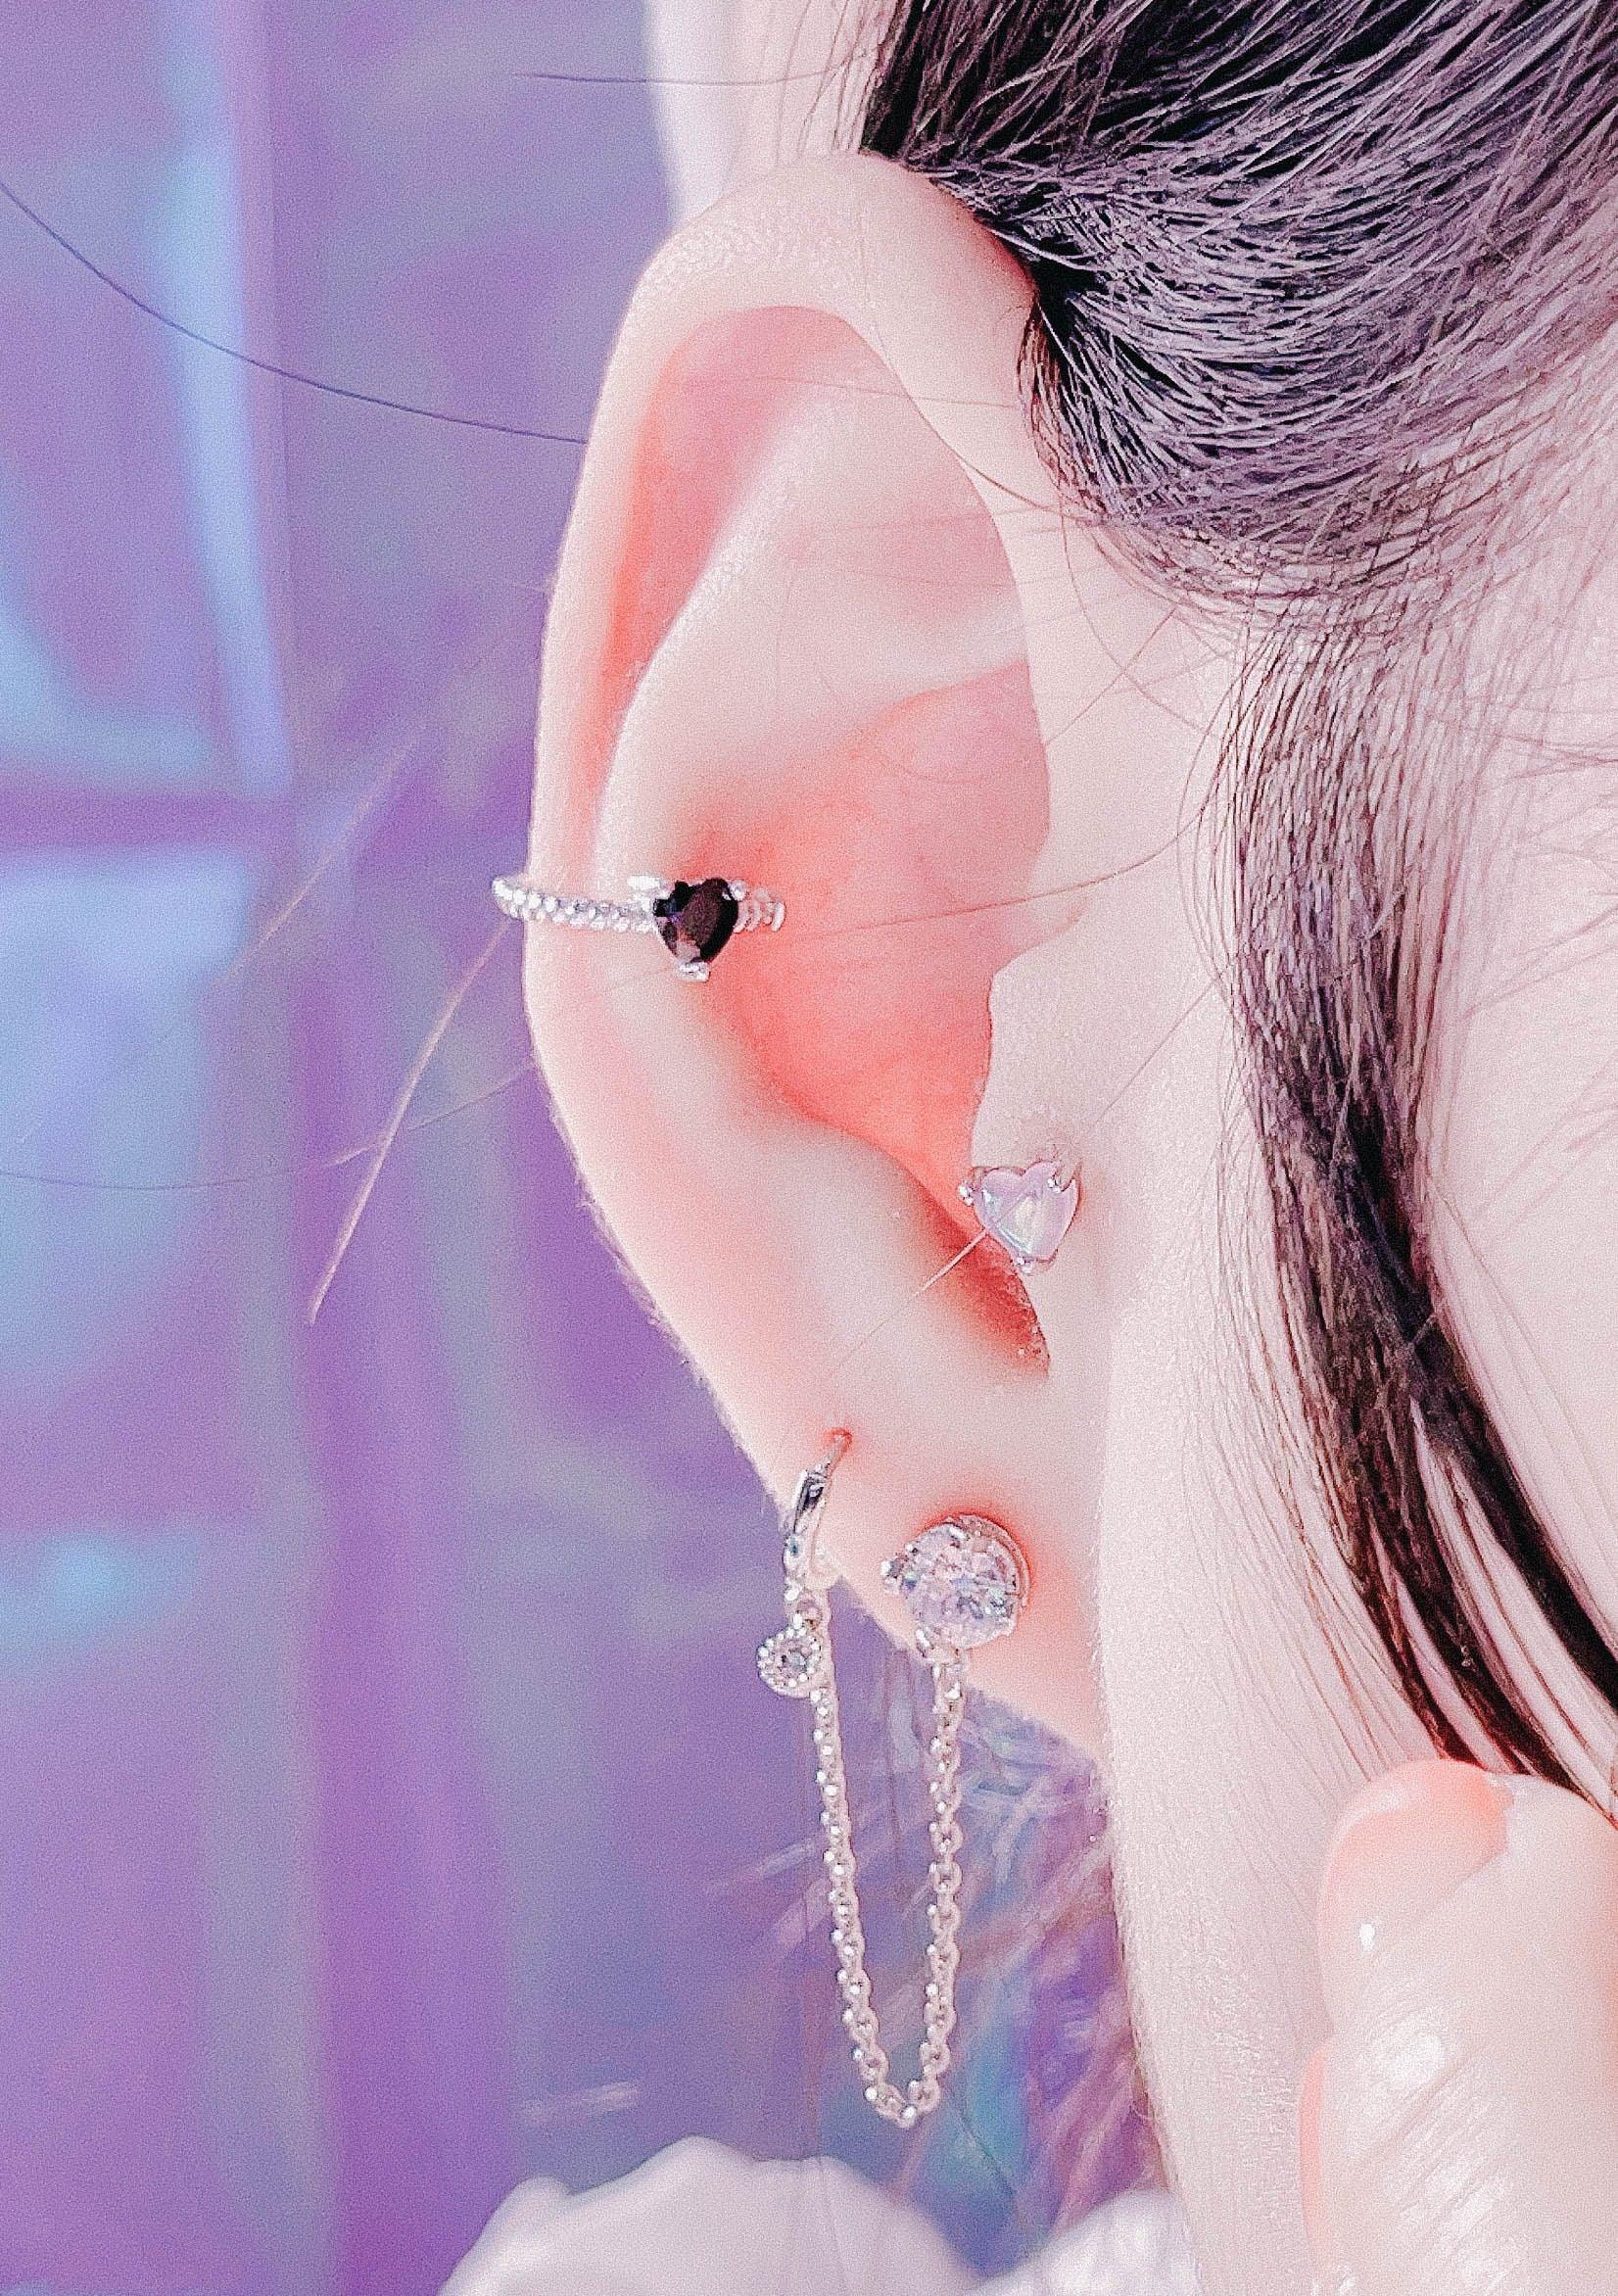 [925 Silver]Black outイヤーカフ Earcuffs anything else 